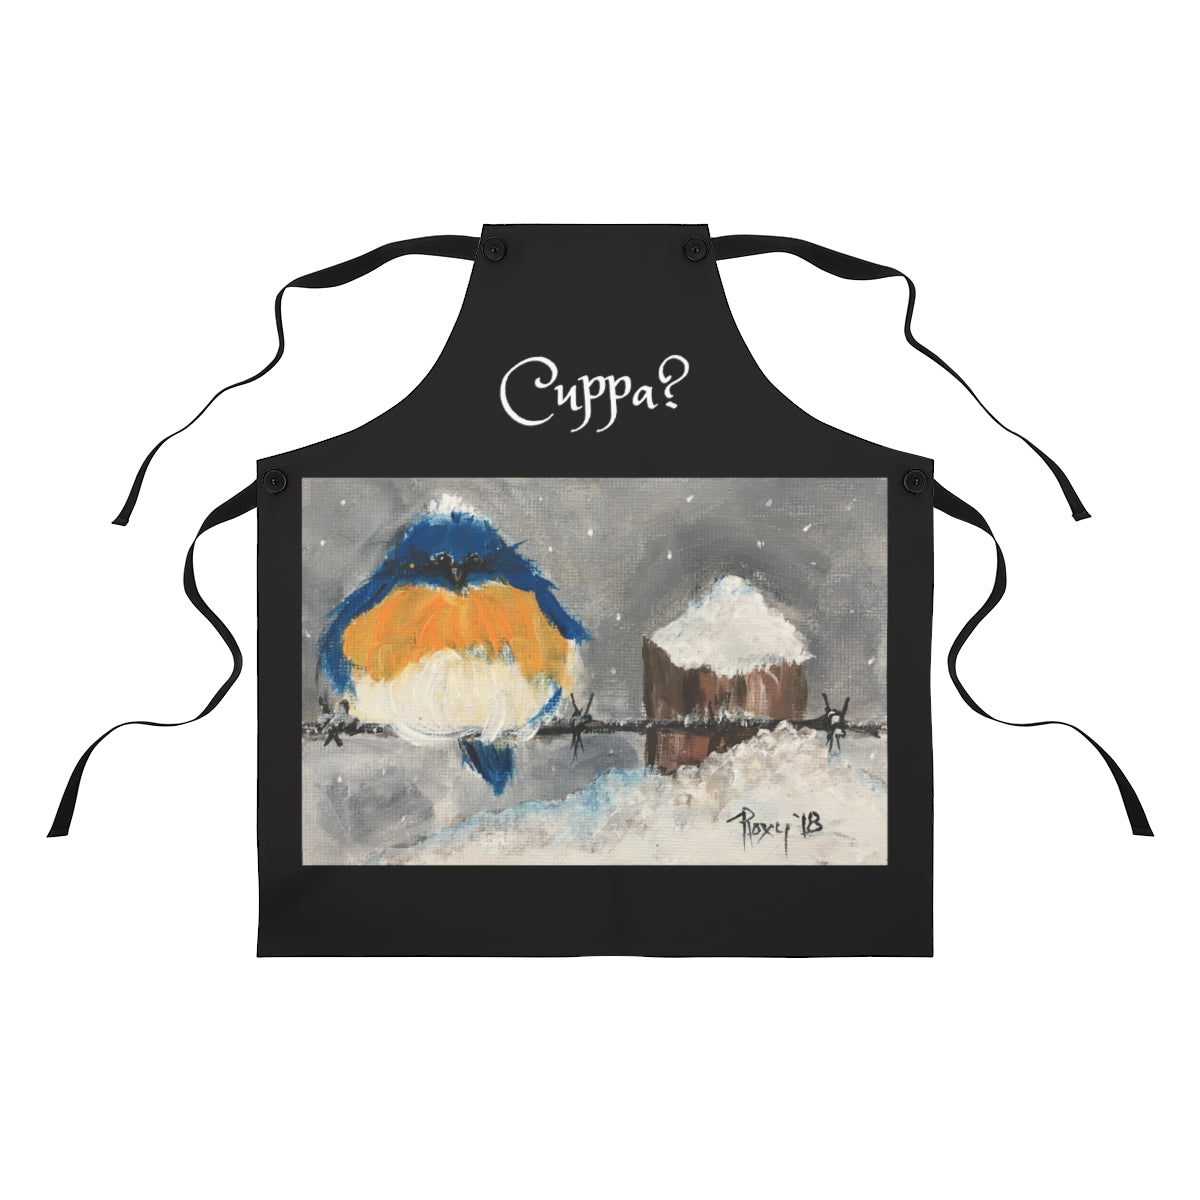 Cuppa? English UK Black Kitchen Apron  with  Bluebird in the Snow Painting